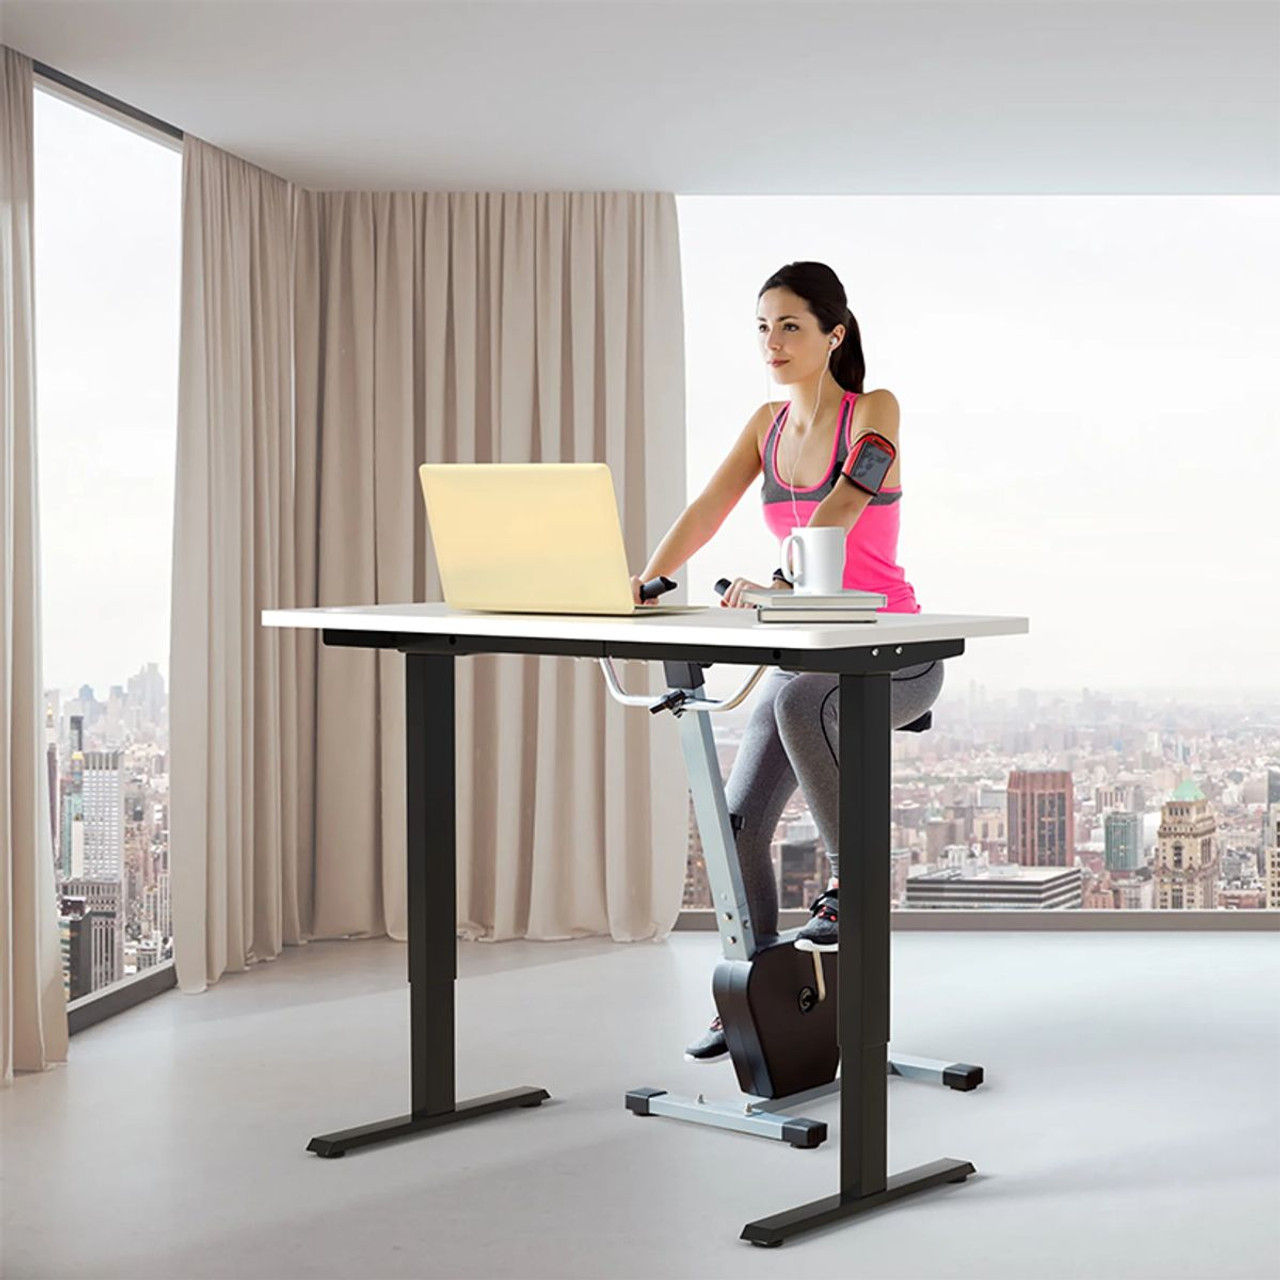 23-Inch Electric Adjustable Standing Desk product image